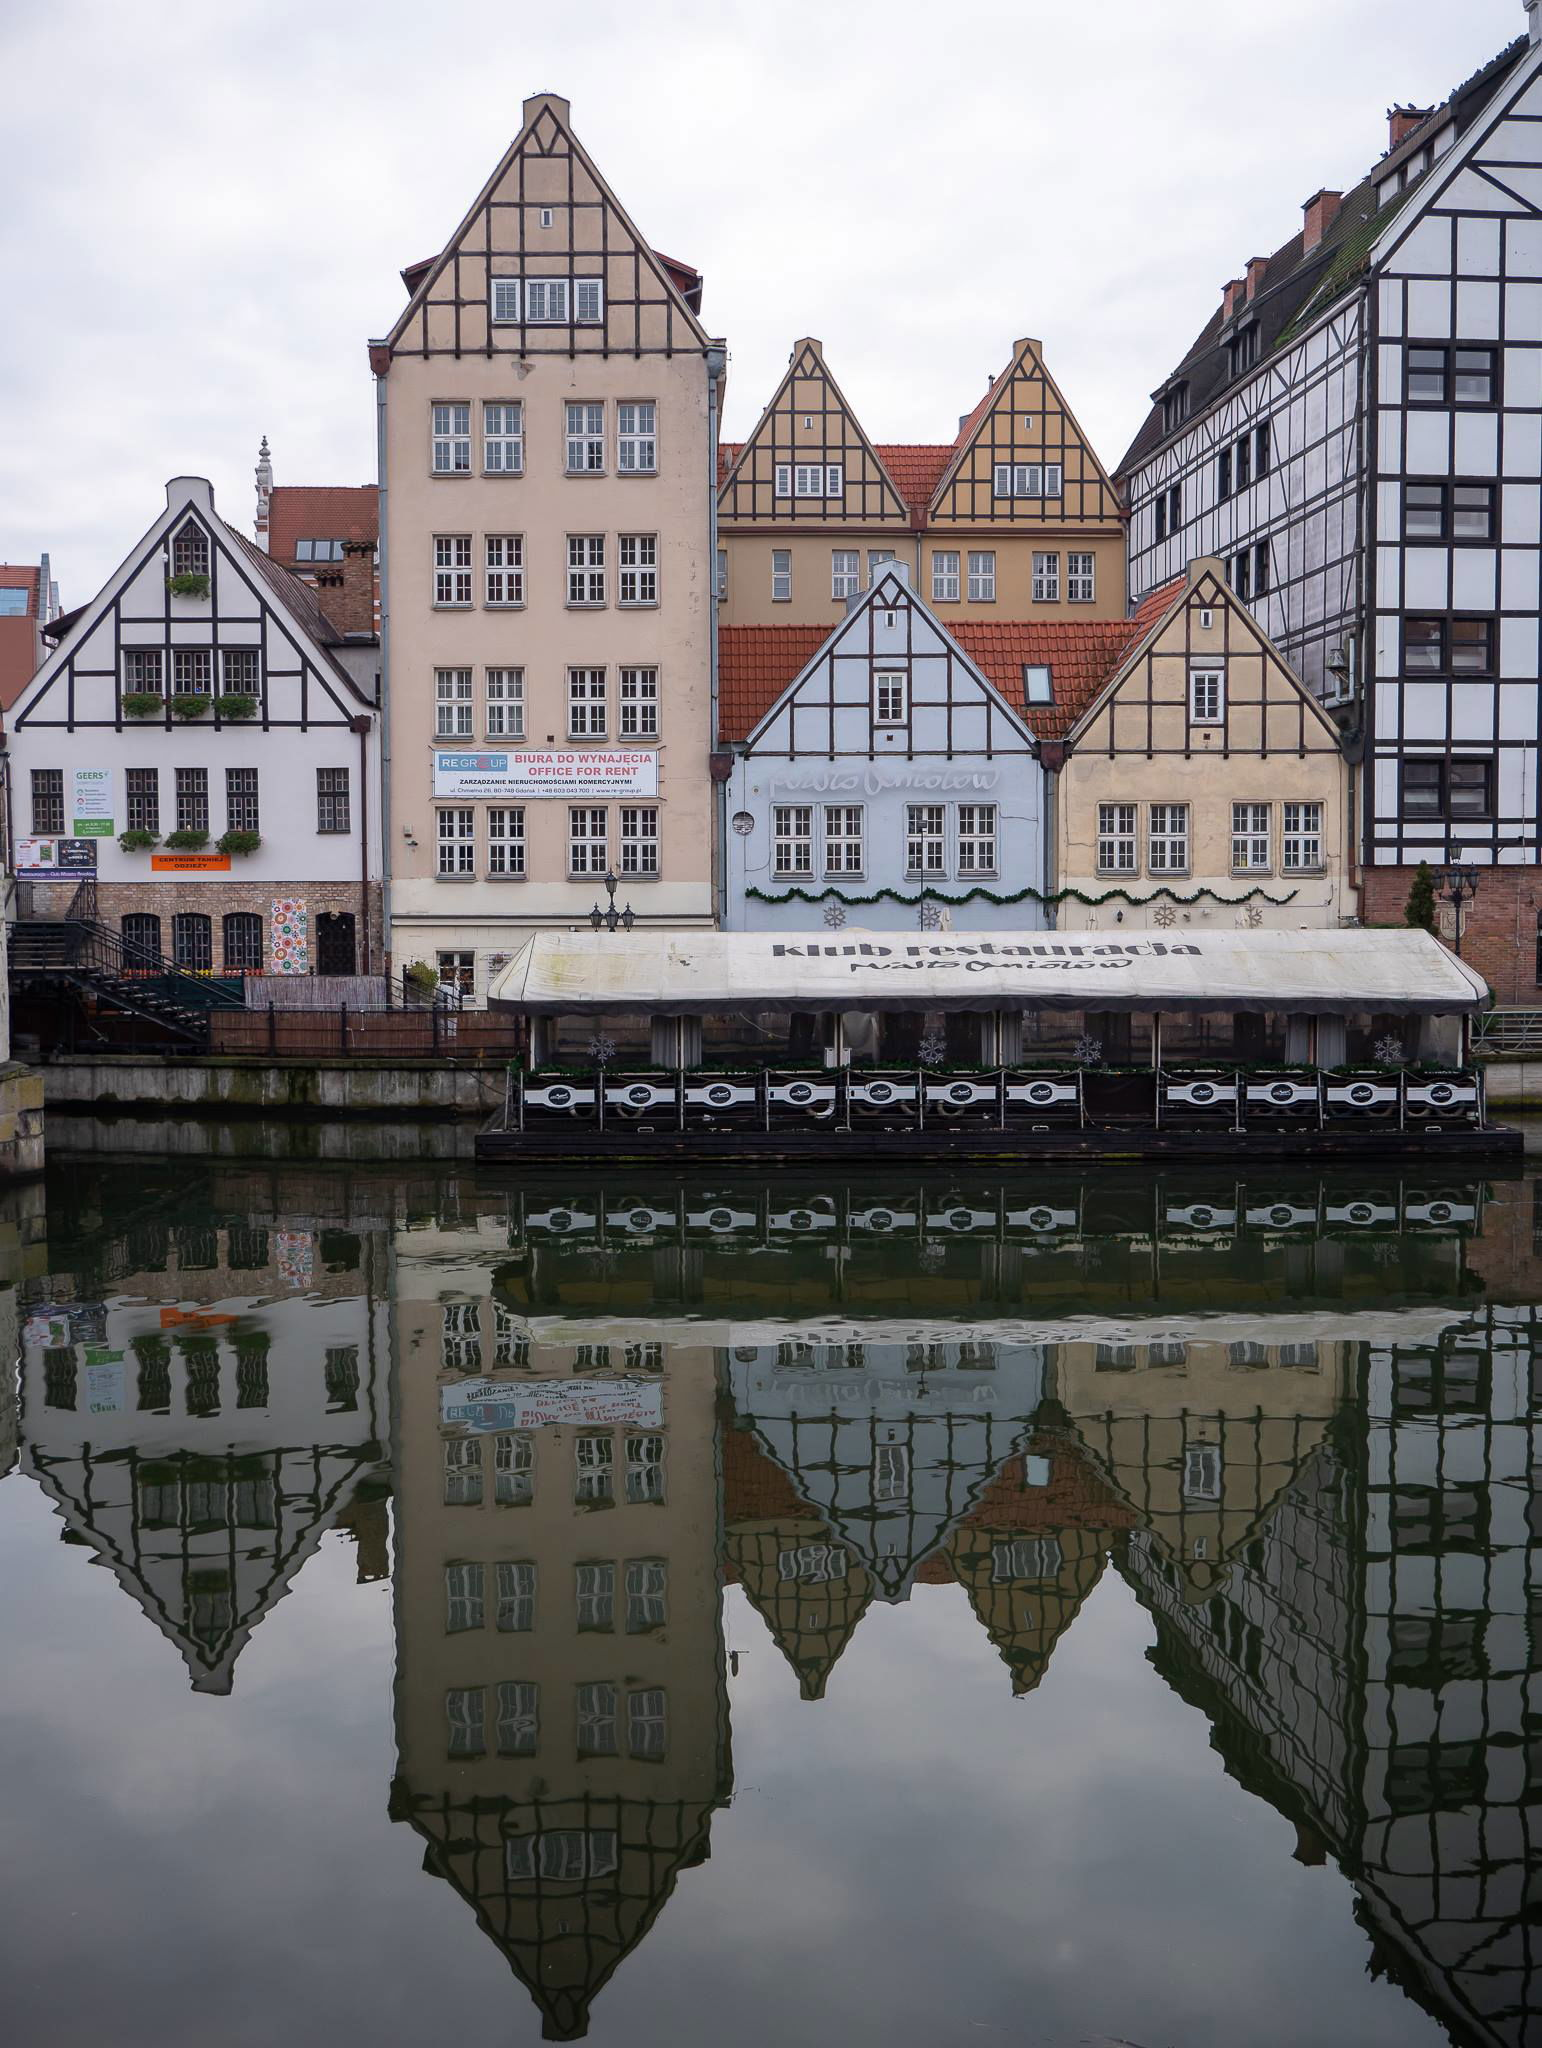 Gdansk, Poland - Copyright @ Thomas Andy Branson/ Branson studios. All rights reserved